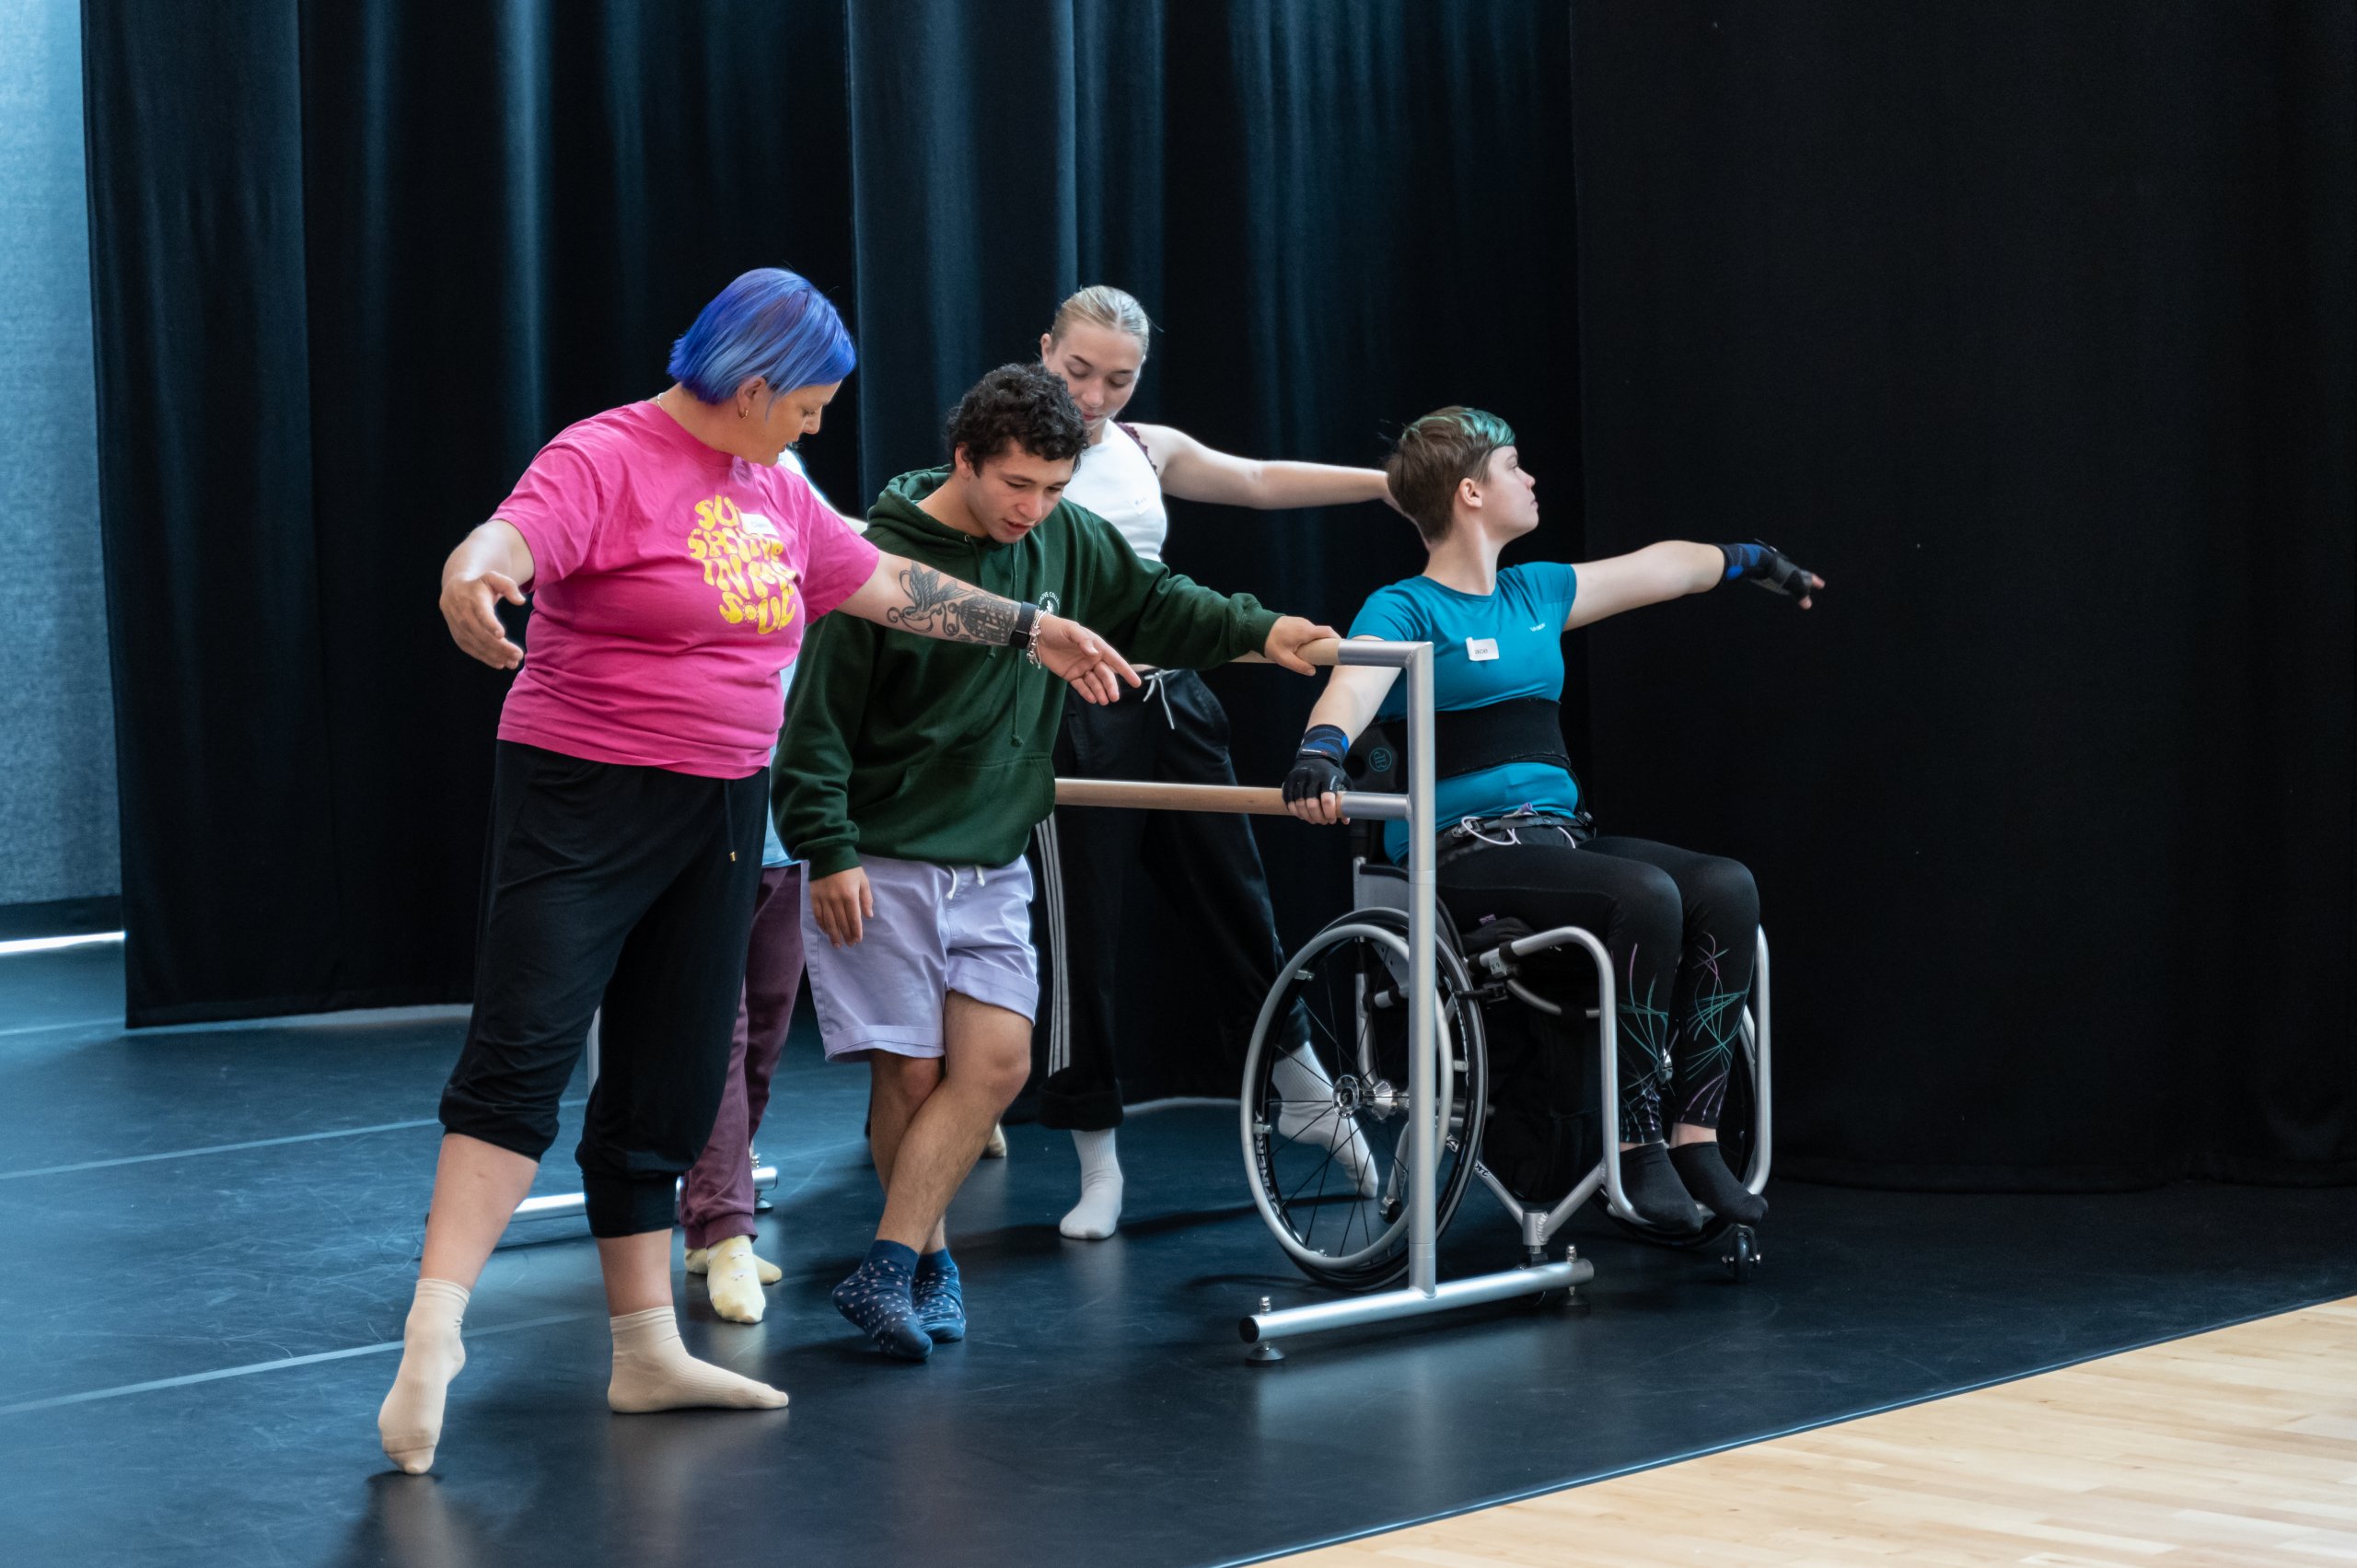 Four dancers around a ballet barre with arms extended out to the side. One dancer in a pink t-shirt is not touching the barre, a dancer in a wheelchair and two other dancers are holding the barre with one arm. 